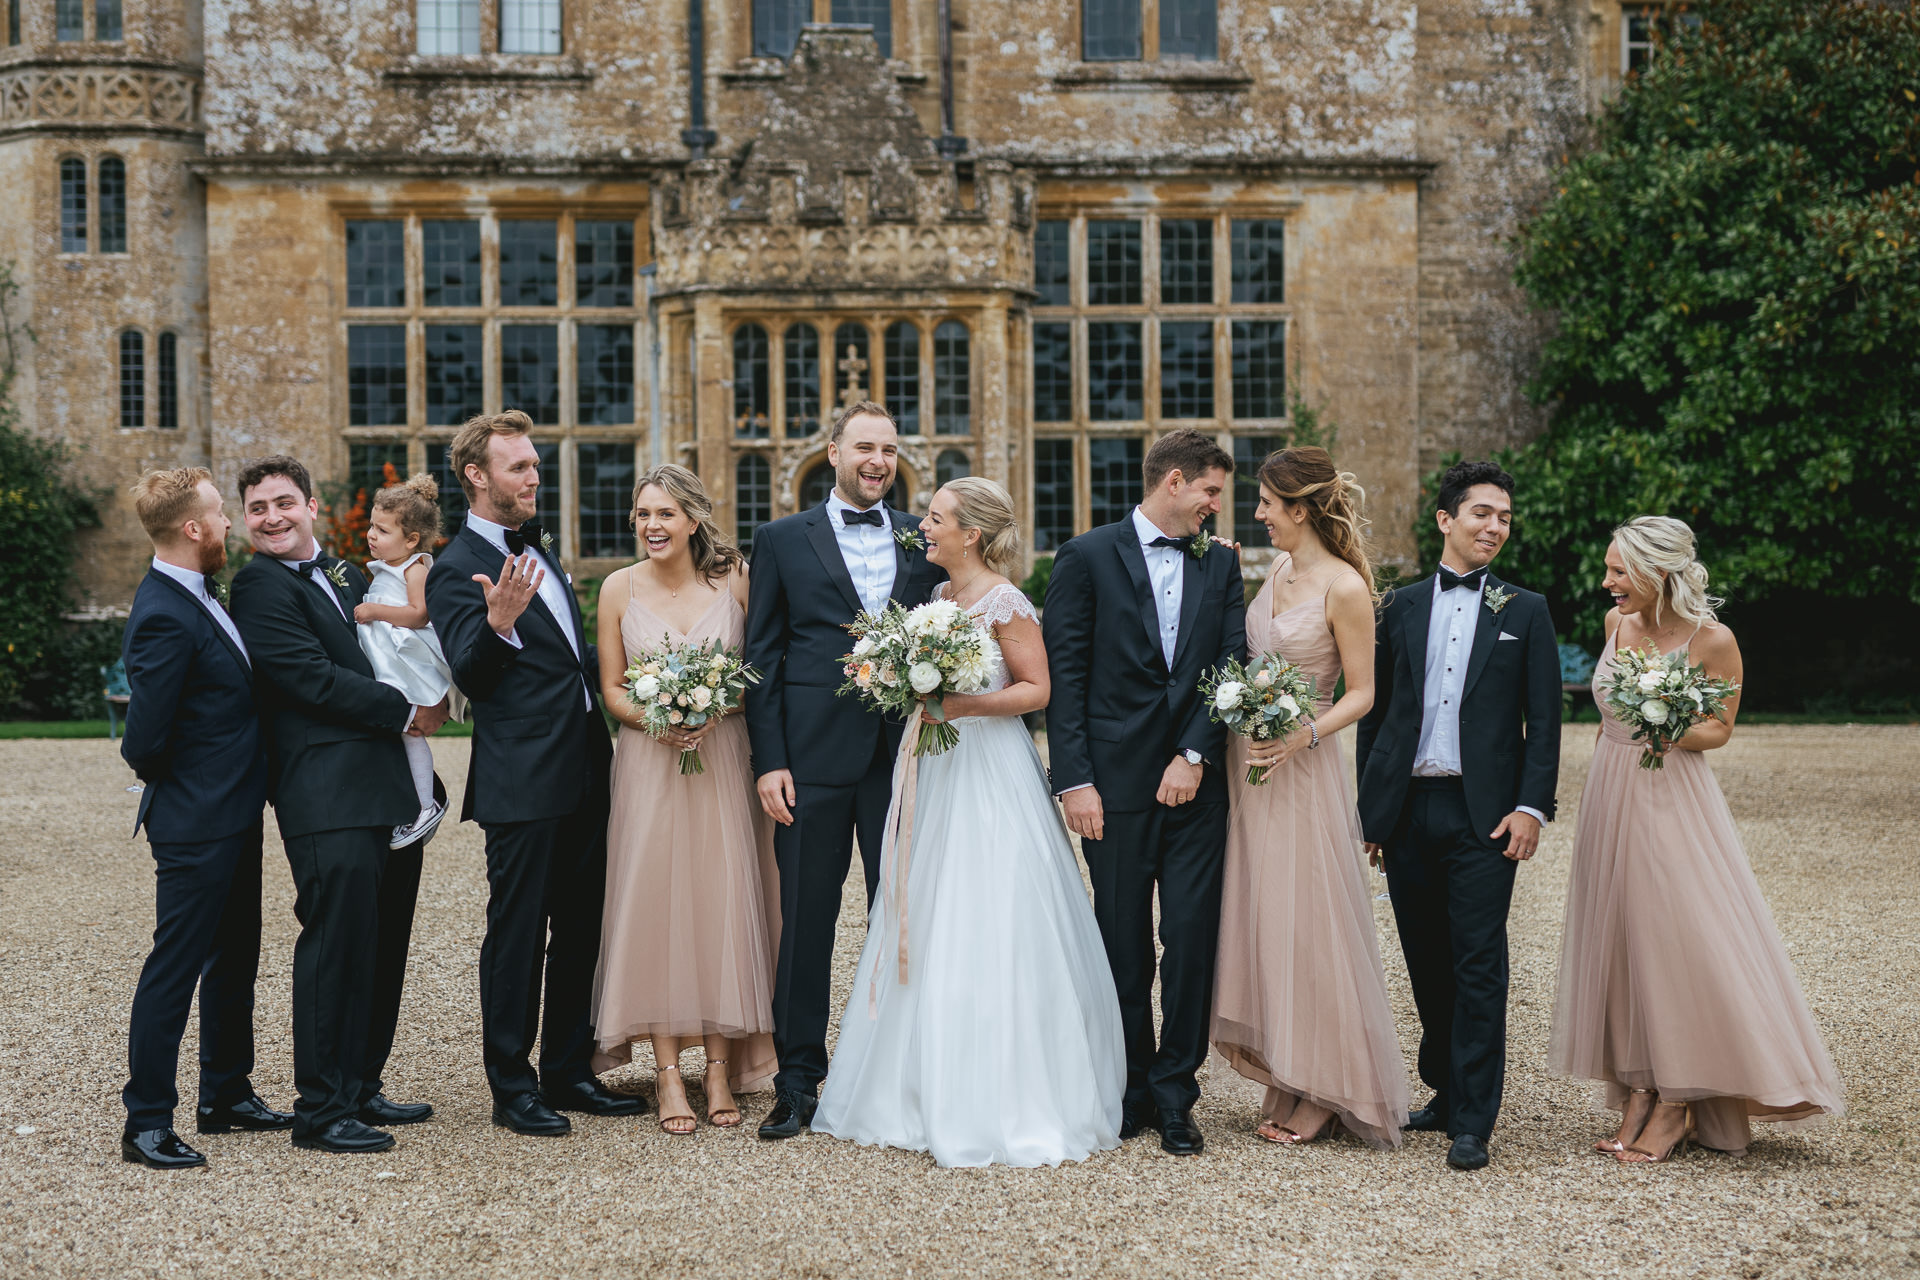 Group shot of bridal party outside Brympton House